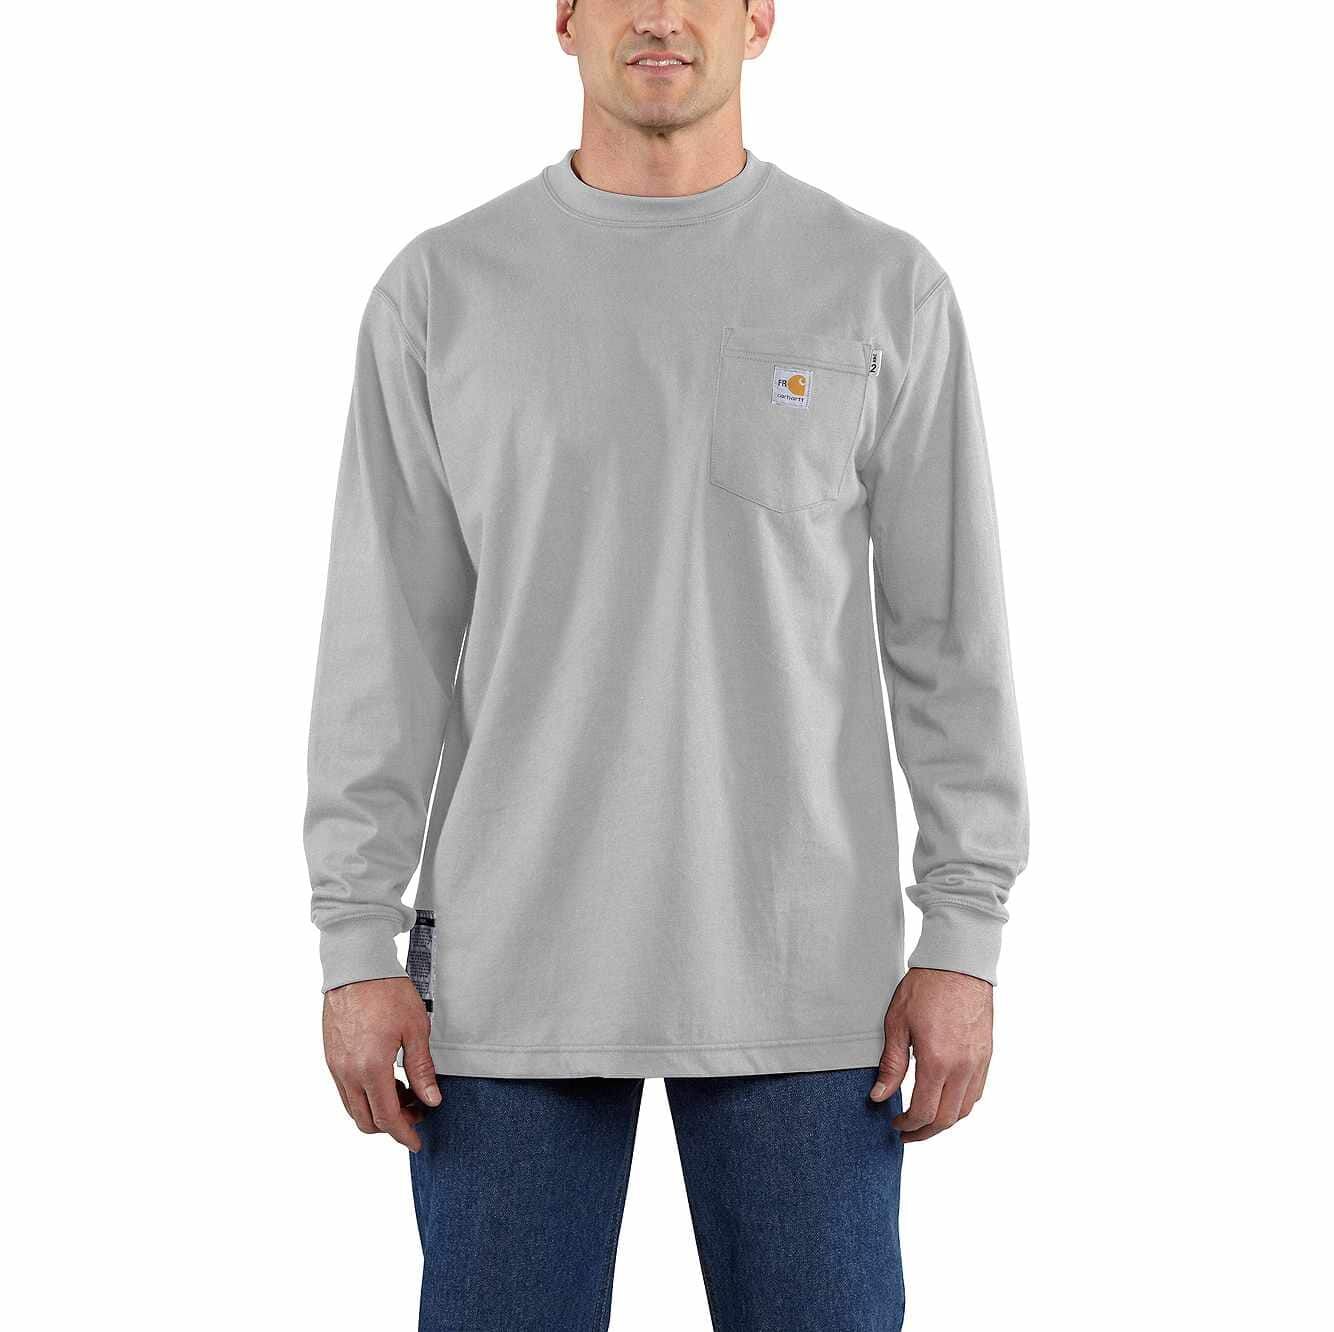 Flame-Resistant Carhartt Force Cotton Long-Sleeve T-Shirt